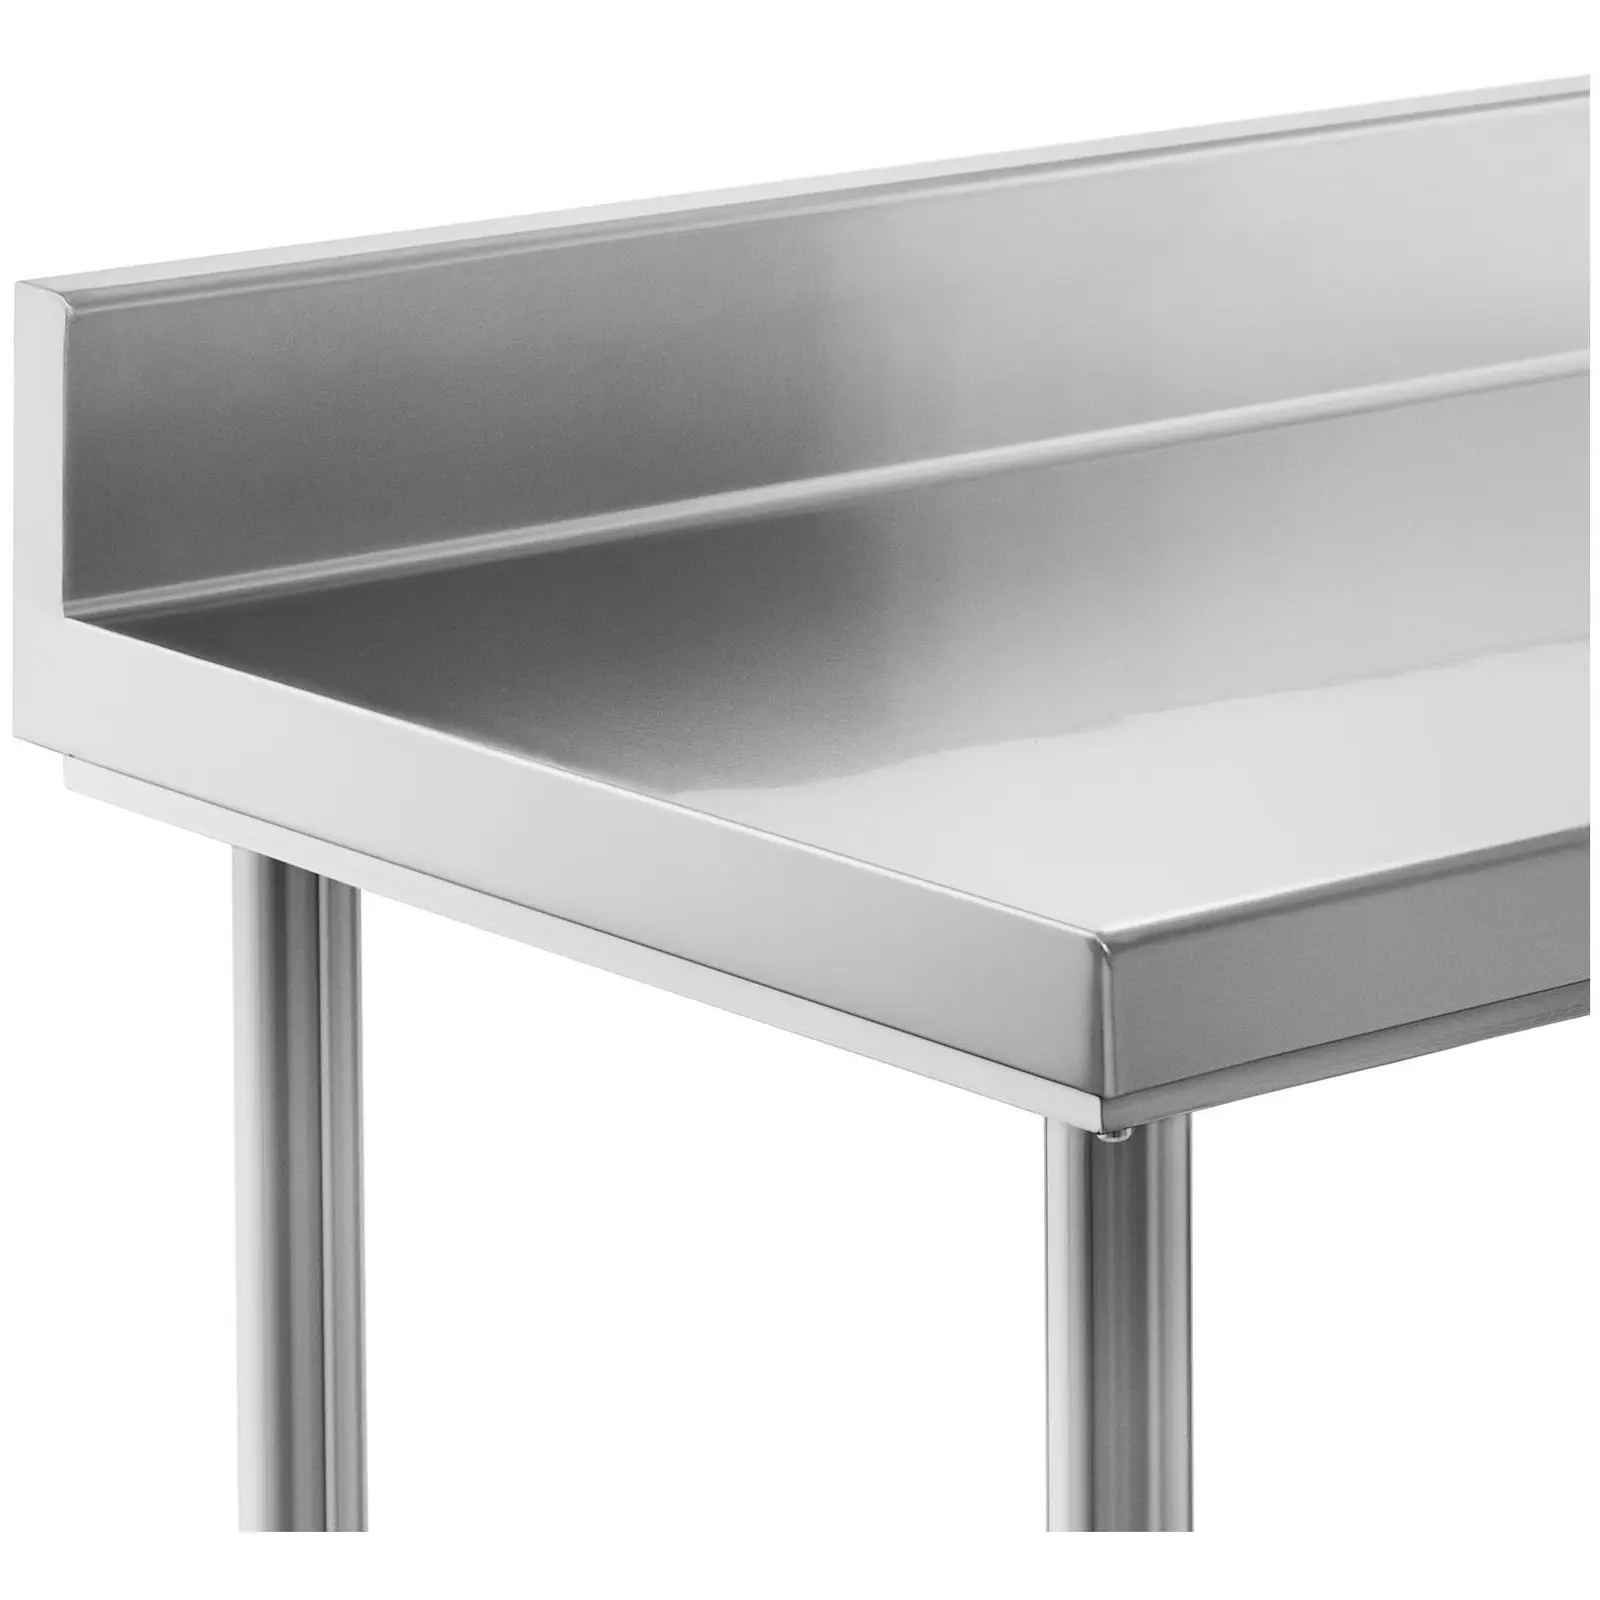 Stainless Steel Work Table - 120 x 60 cm - upstand - 137 kg capacity